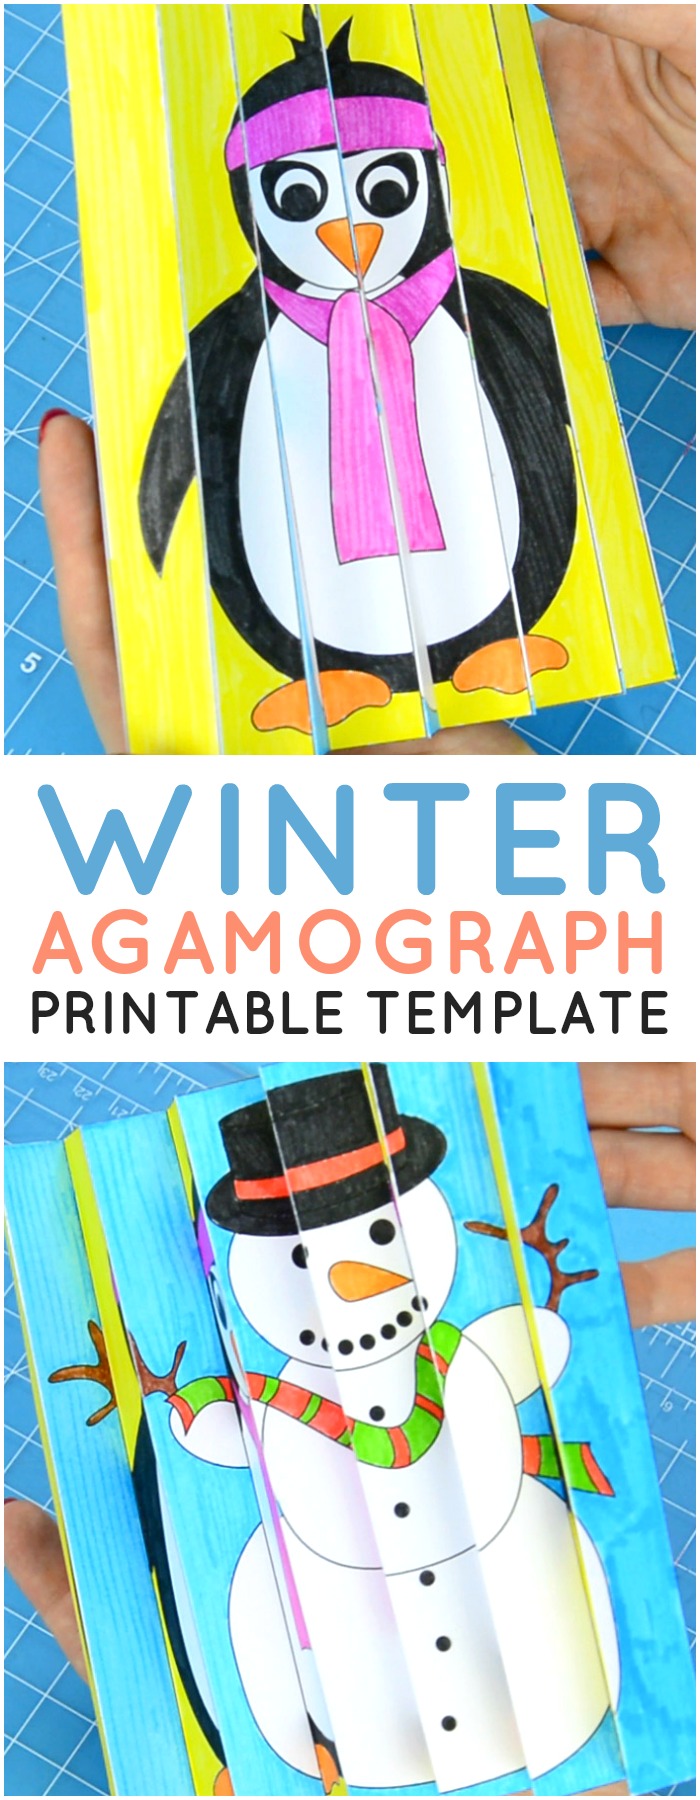 Printable Winter Agamograph Template for Kids to Make. Super fun Winter craft for kids to have loads of fun.